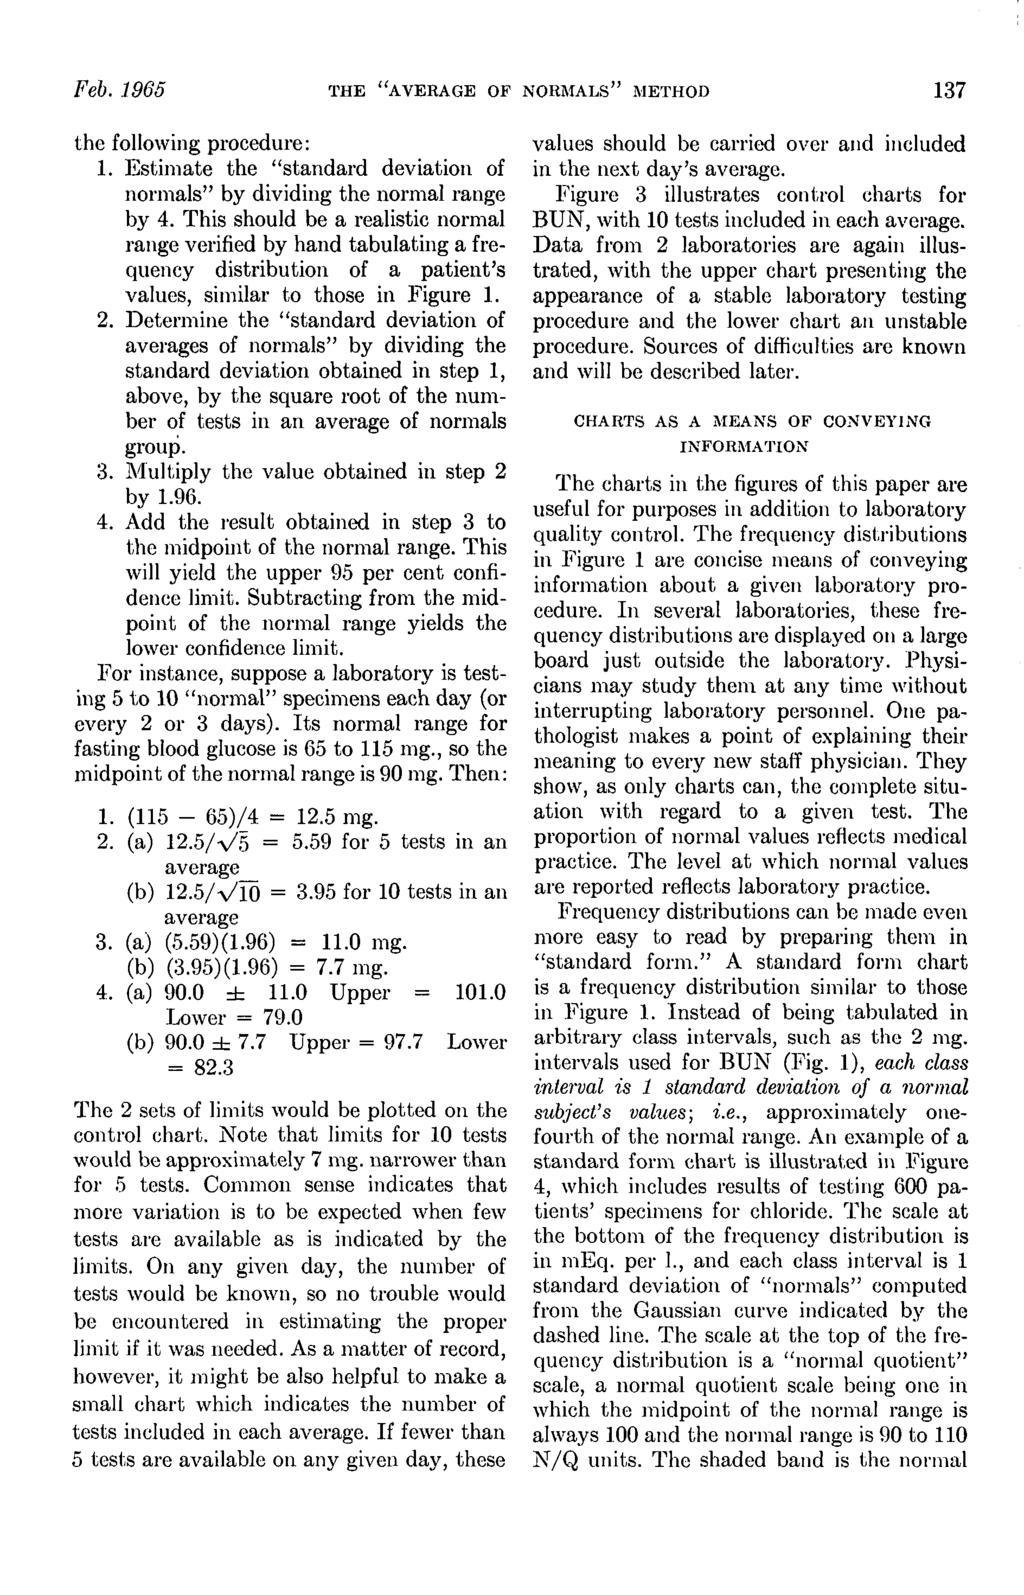 Feb. 1965 THE "AVERAGE OF NORMALS" METHOD 137 the following procedure: 1. Estimate the "standard deviation of normals" by dividing the normal range by 4.